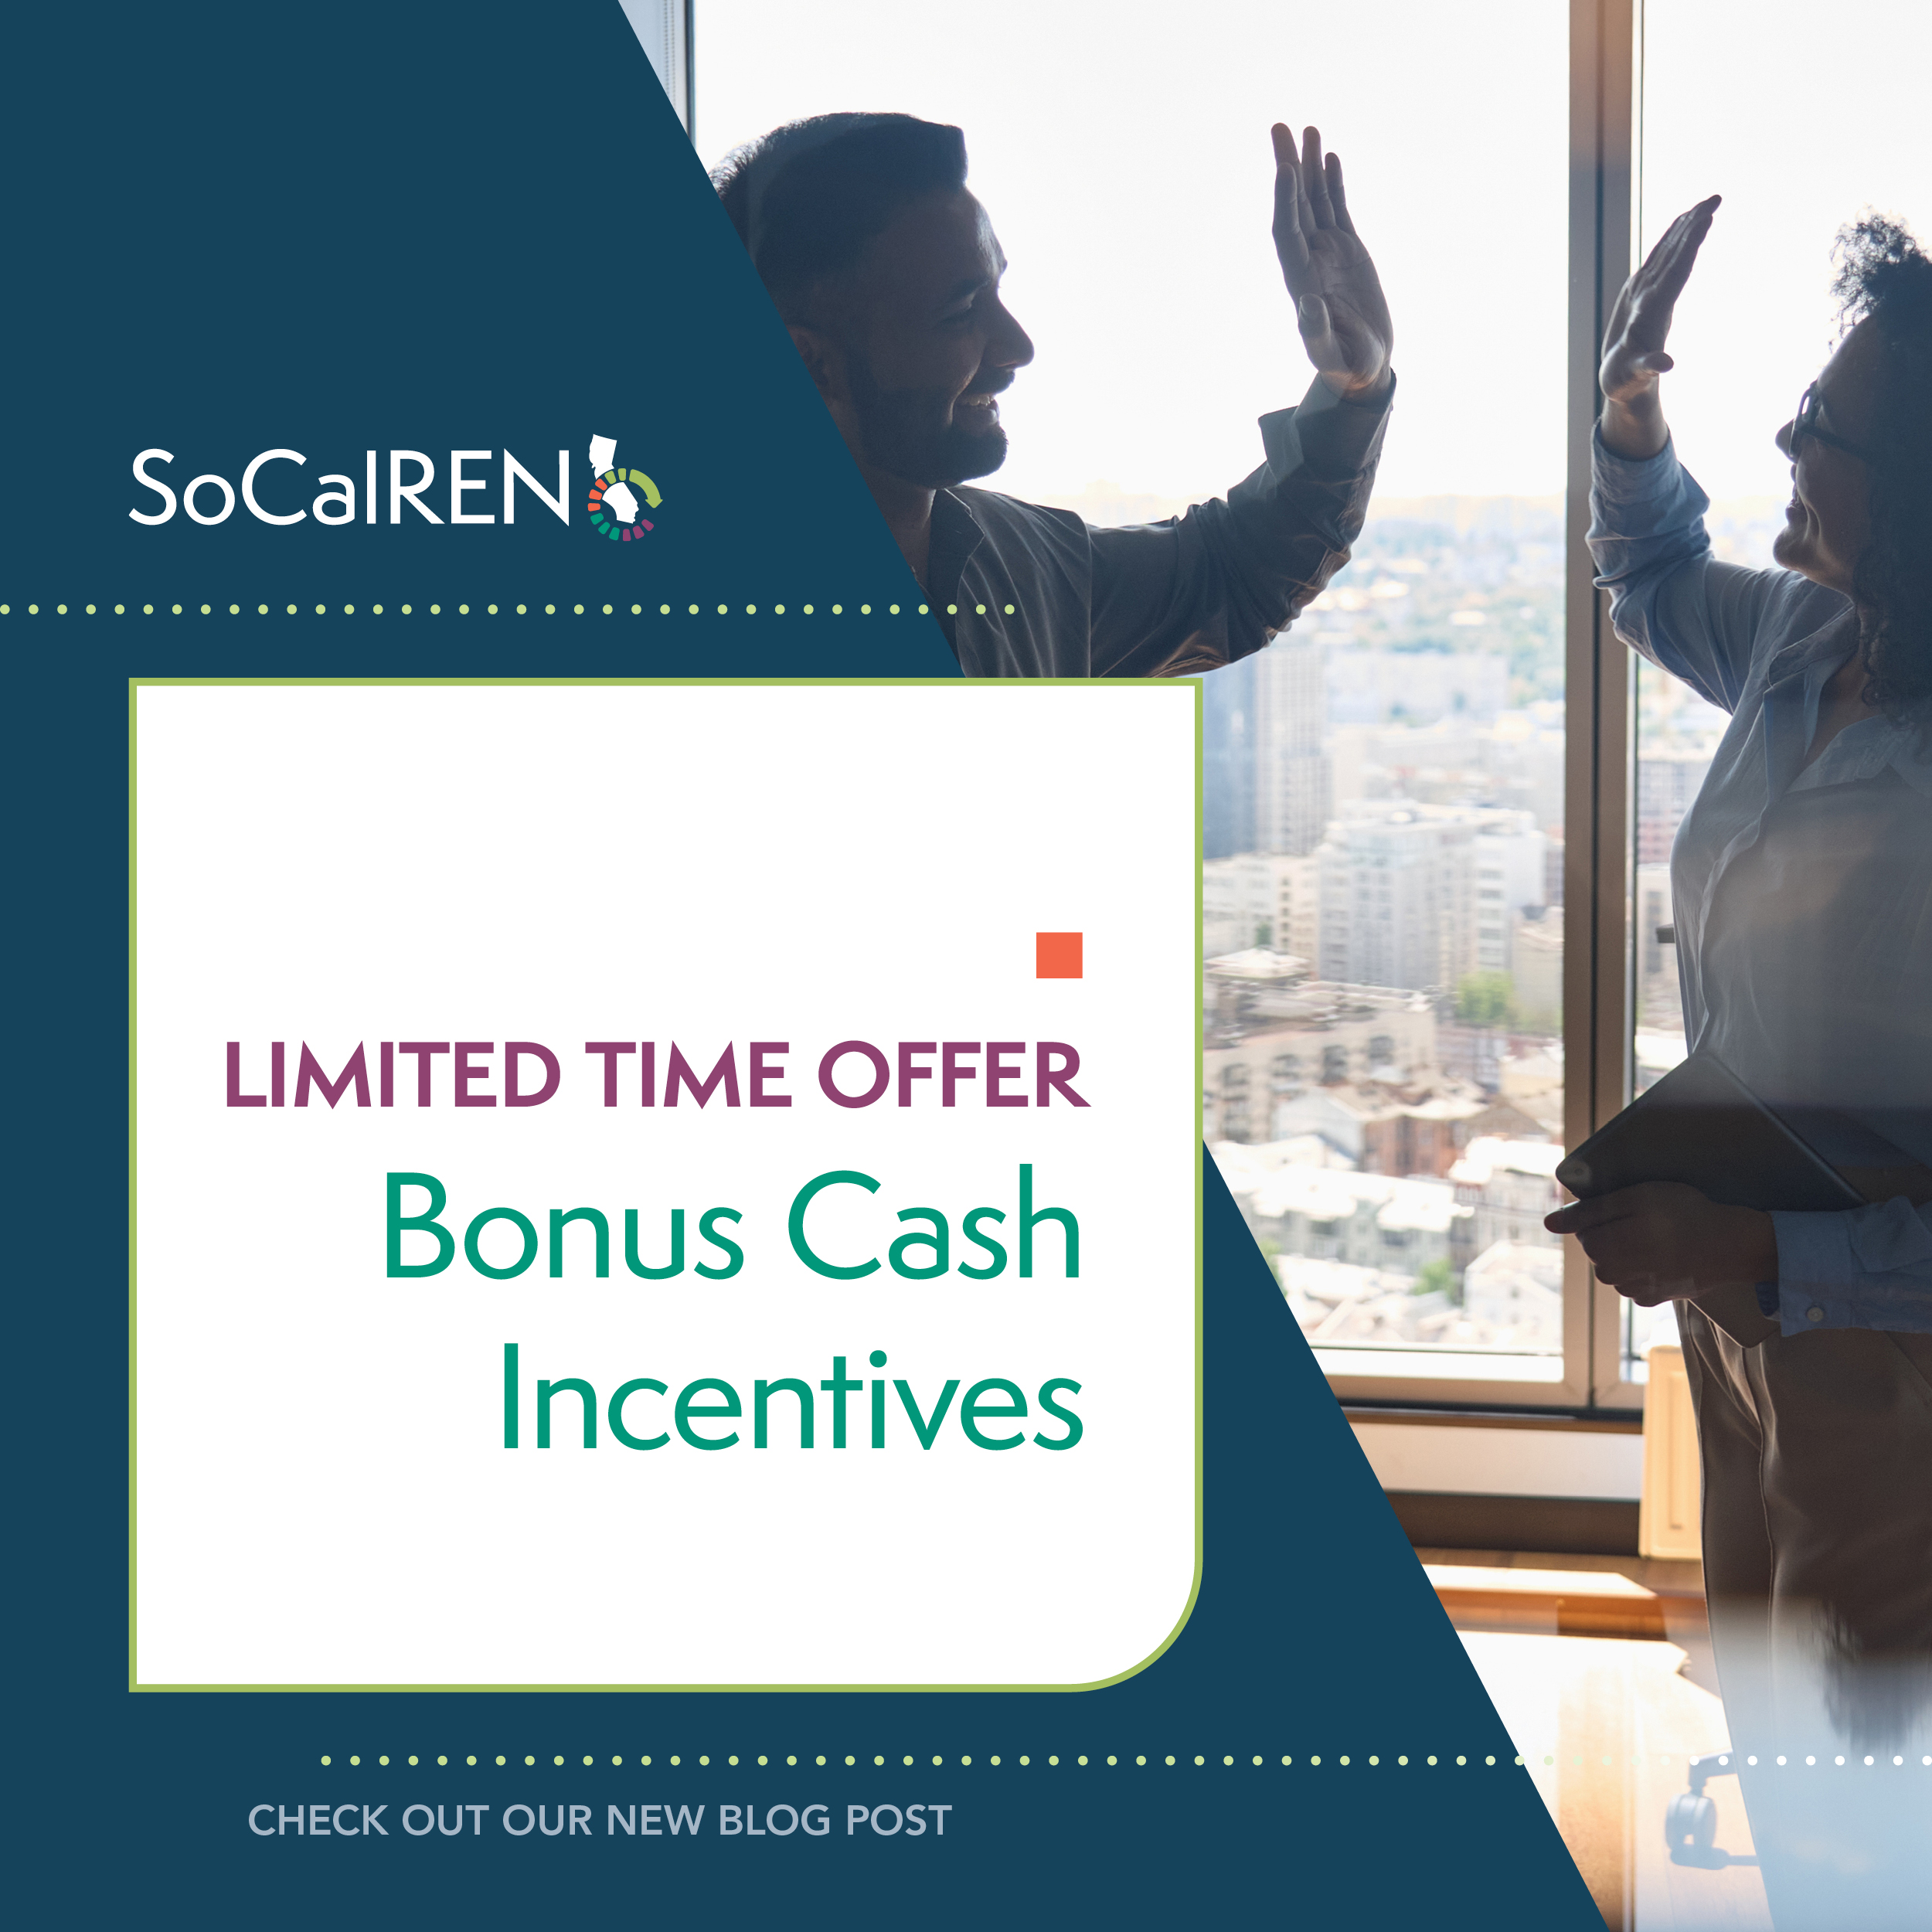 Receive bonus cash incentives from SoCalREN this year